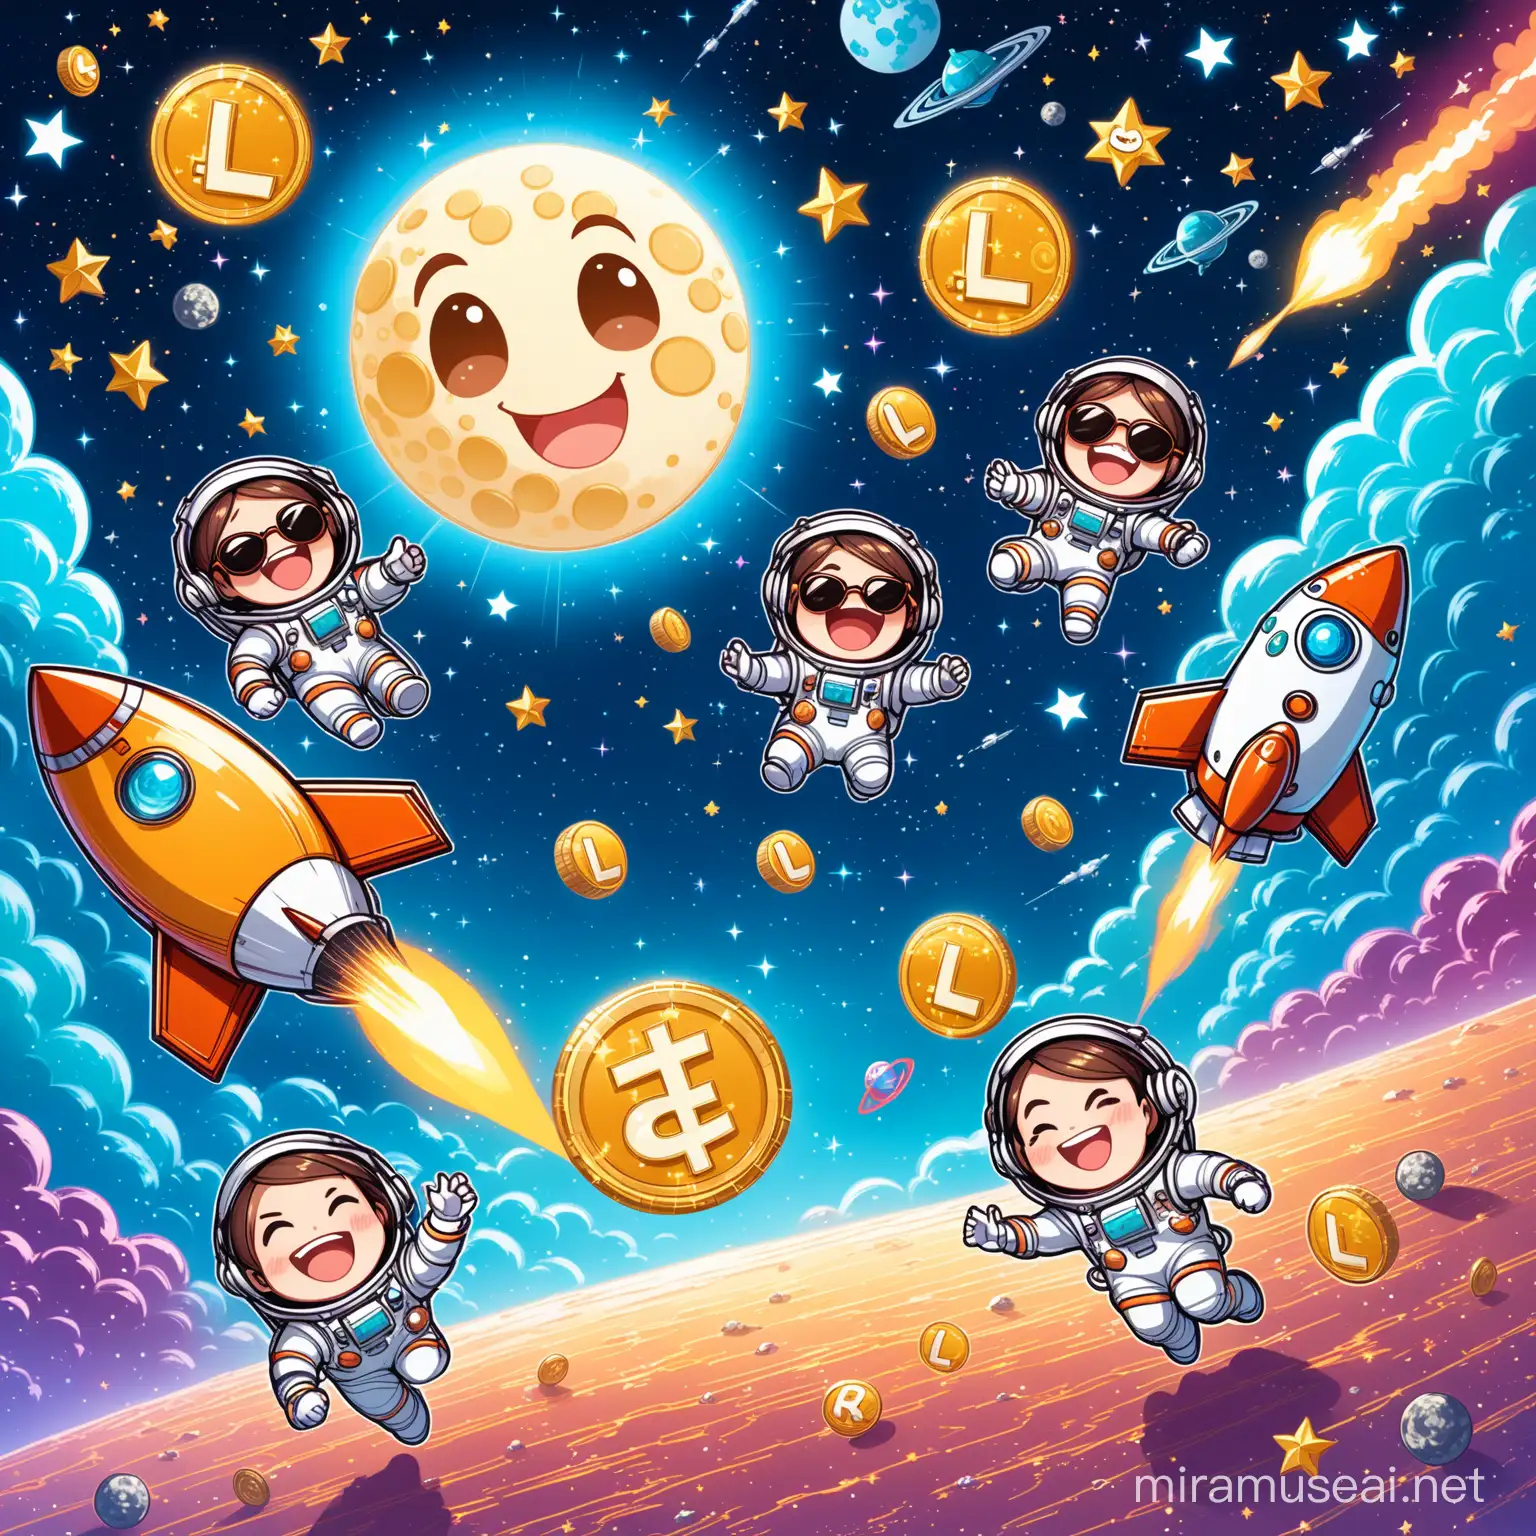 Whimsical Lunar Landscape with Laughing Astronauts and LunarLolCoin LOL